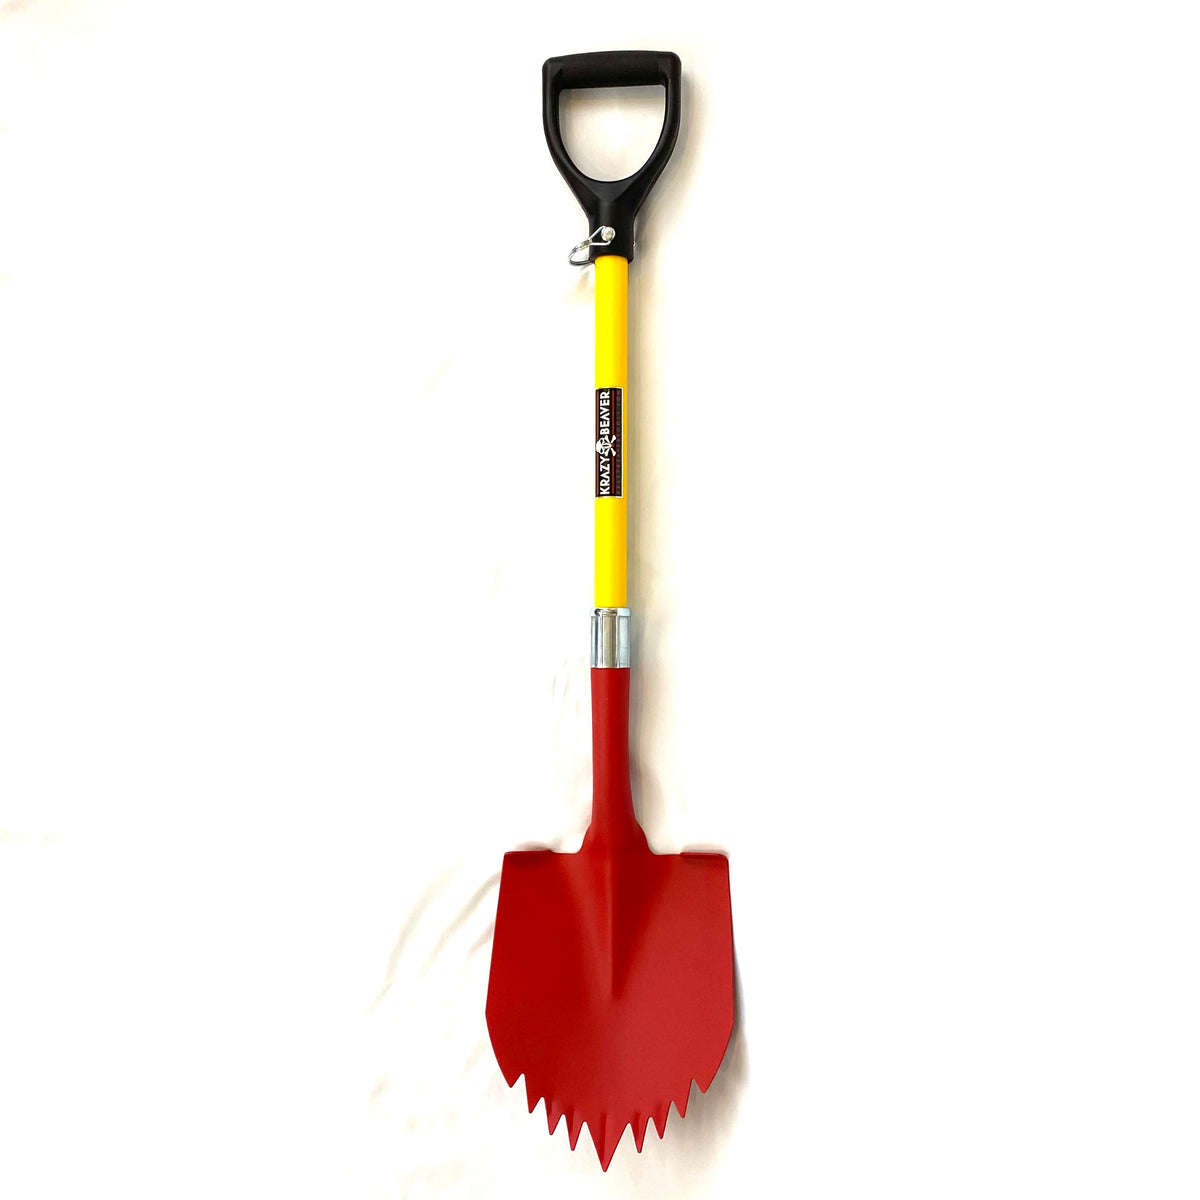 Krazy Beaver Shovel (Textured Red Head / Yellow Handle 45637)  Recovery Gear, Camping gear, Shovel, Camping Krazy Beaver Tools- Overland Kitted